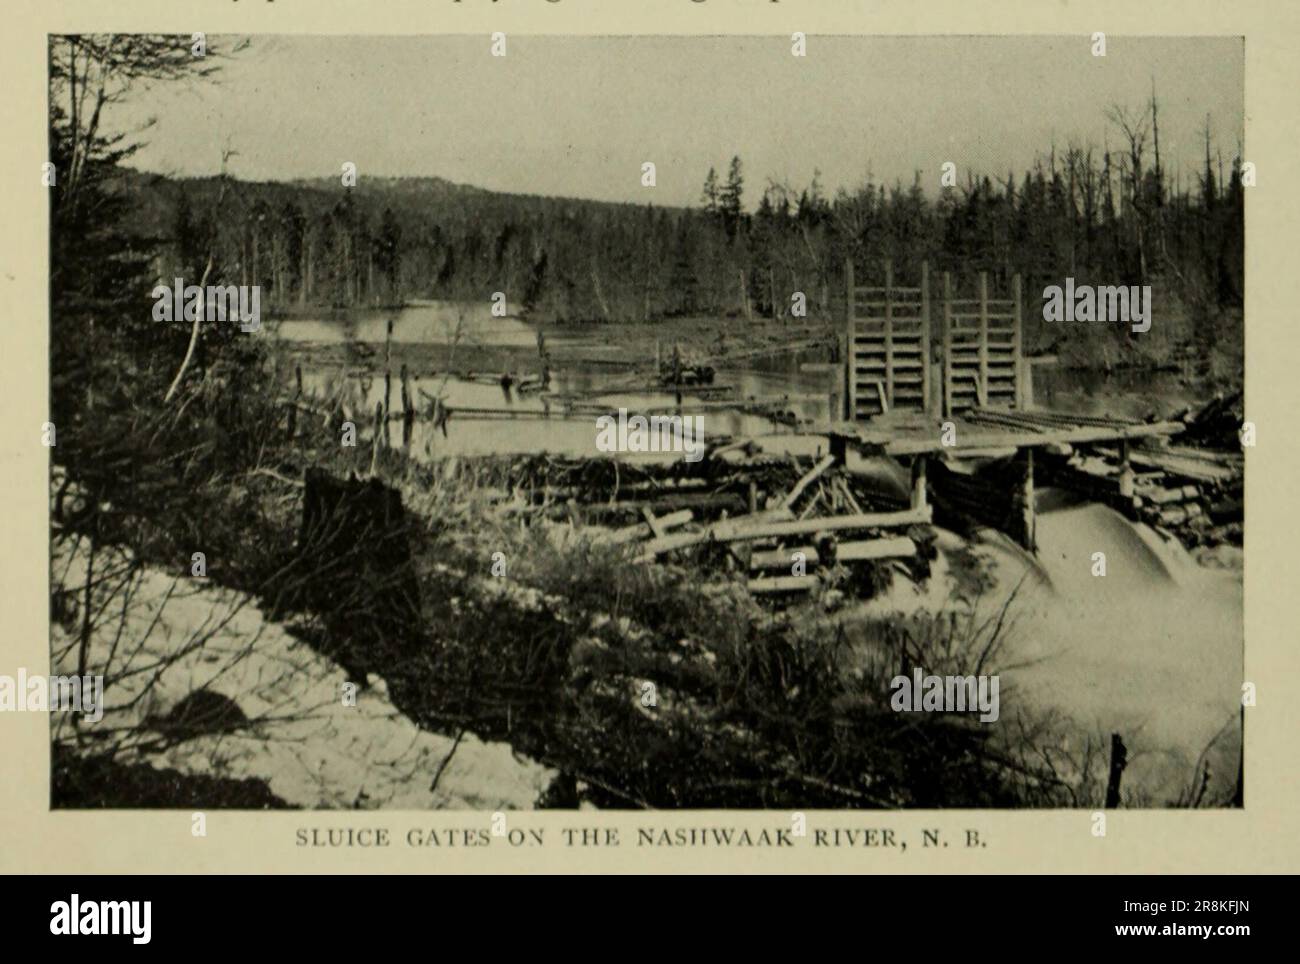 Sluice Gates on the Nashwaak River N. B. from the Article THE CANADIAN LUMBER INDUSTRY. by J. S. Robertson from The Engineering Magazine DEVOTED TO INDUSTRIAL PROGRESS Volume X October 1896 NEW YORK The Engineering Magazine Co Stock Photo